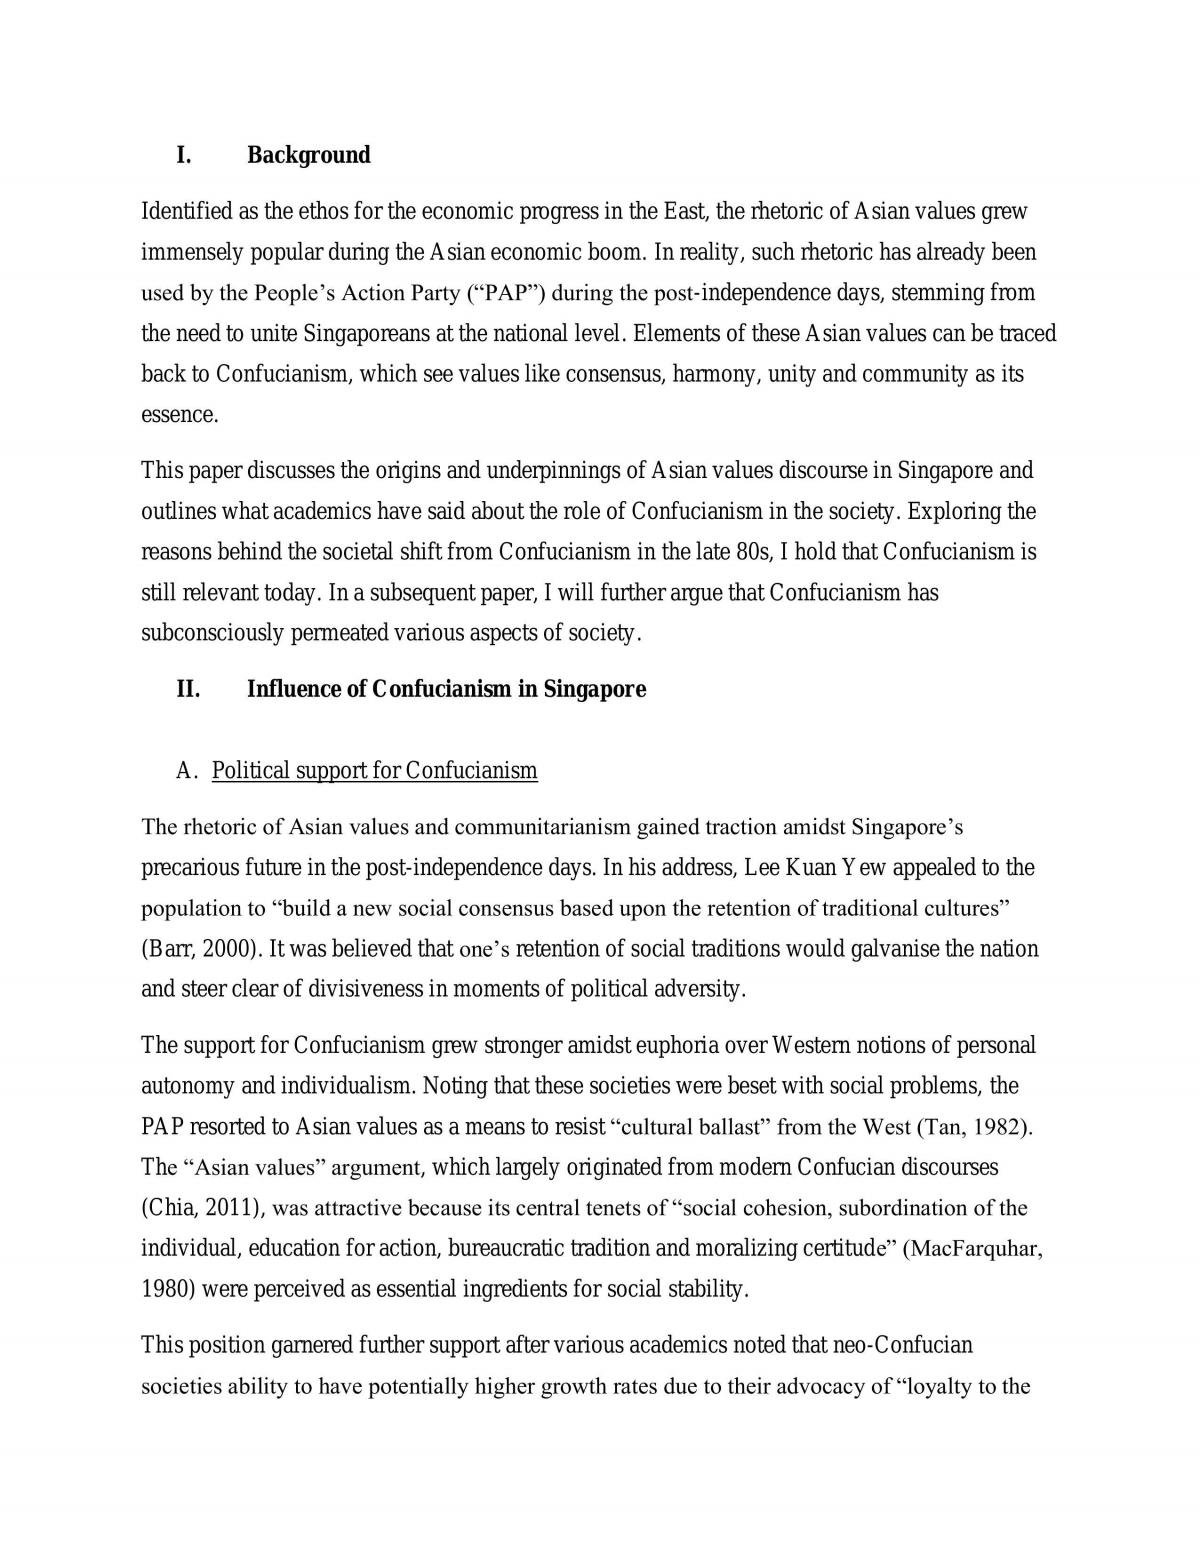 Essay discussing the influence of Confucianism on Singapore  - Page 2